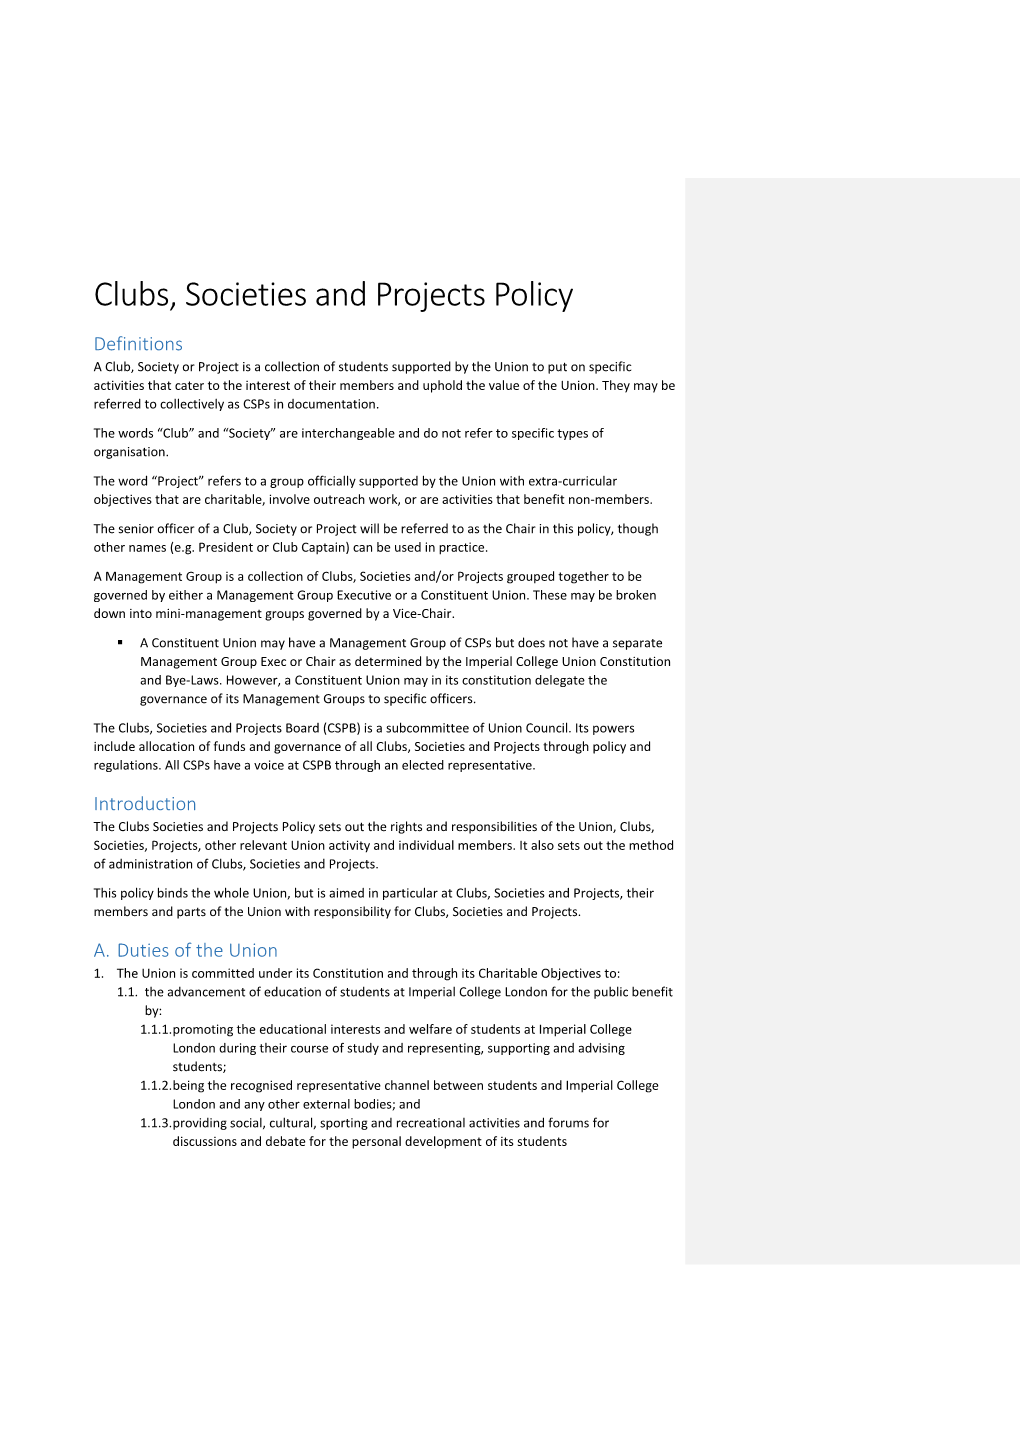 Clubs, Societies and Projects Policy